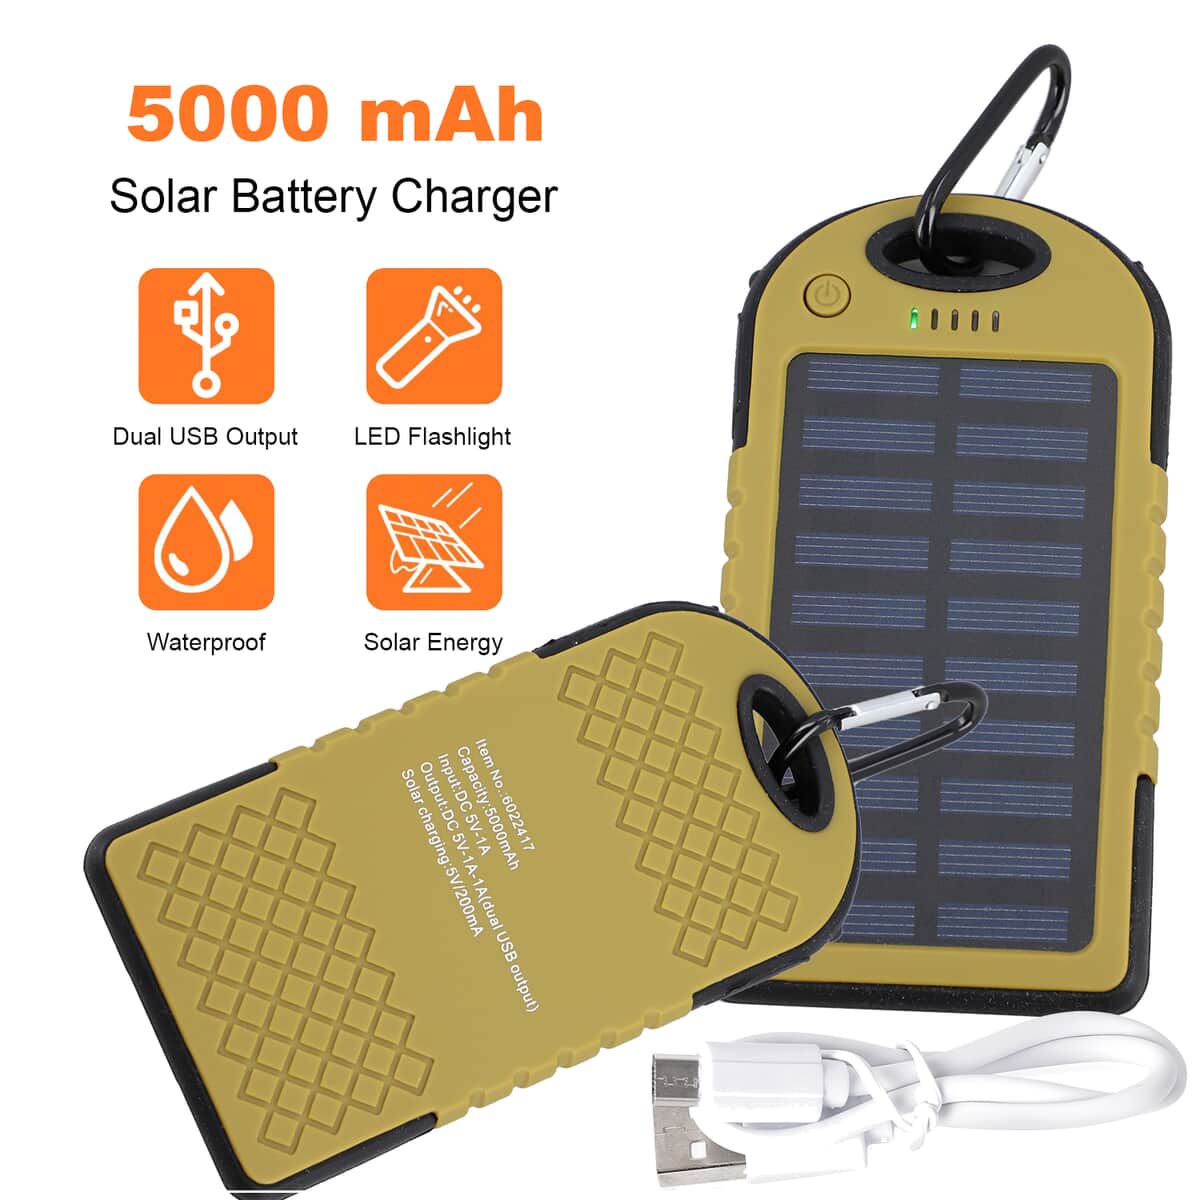 HOMESMART Golden Carabiner Solar 5000 mAh Battery Charger with USB & Emergency LED Torch image number 1